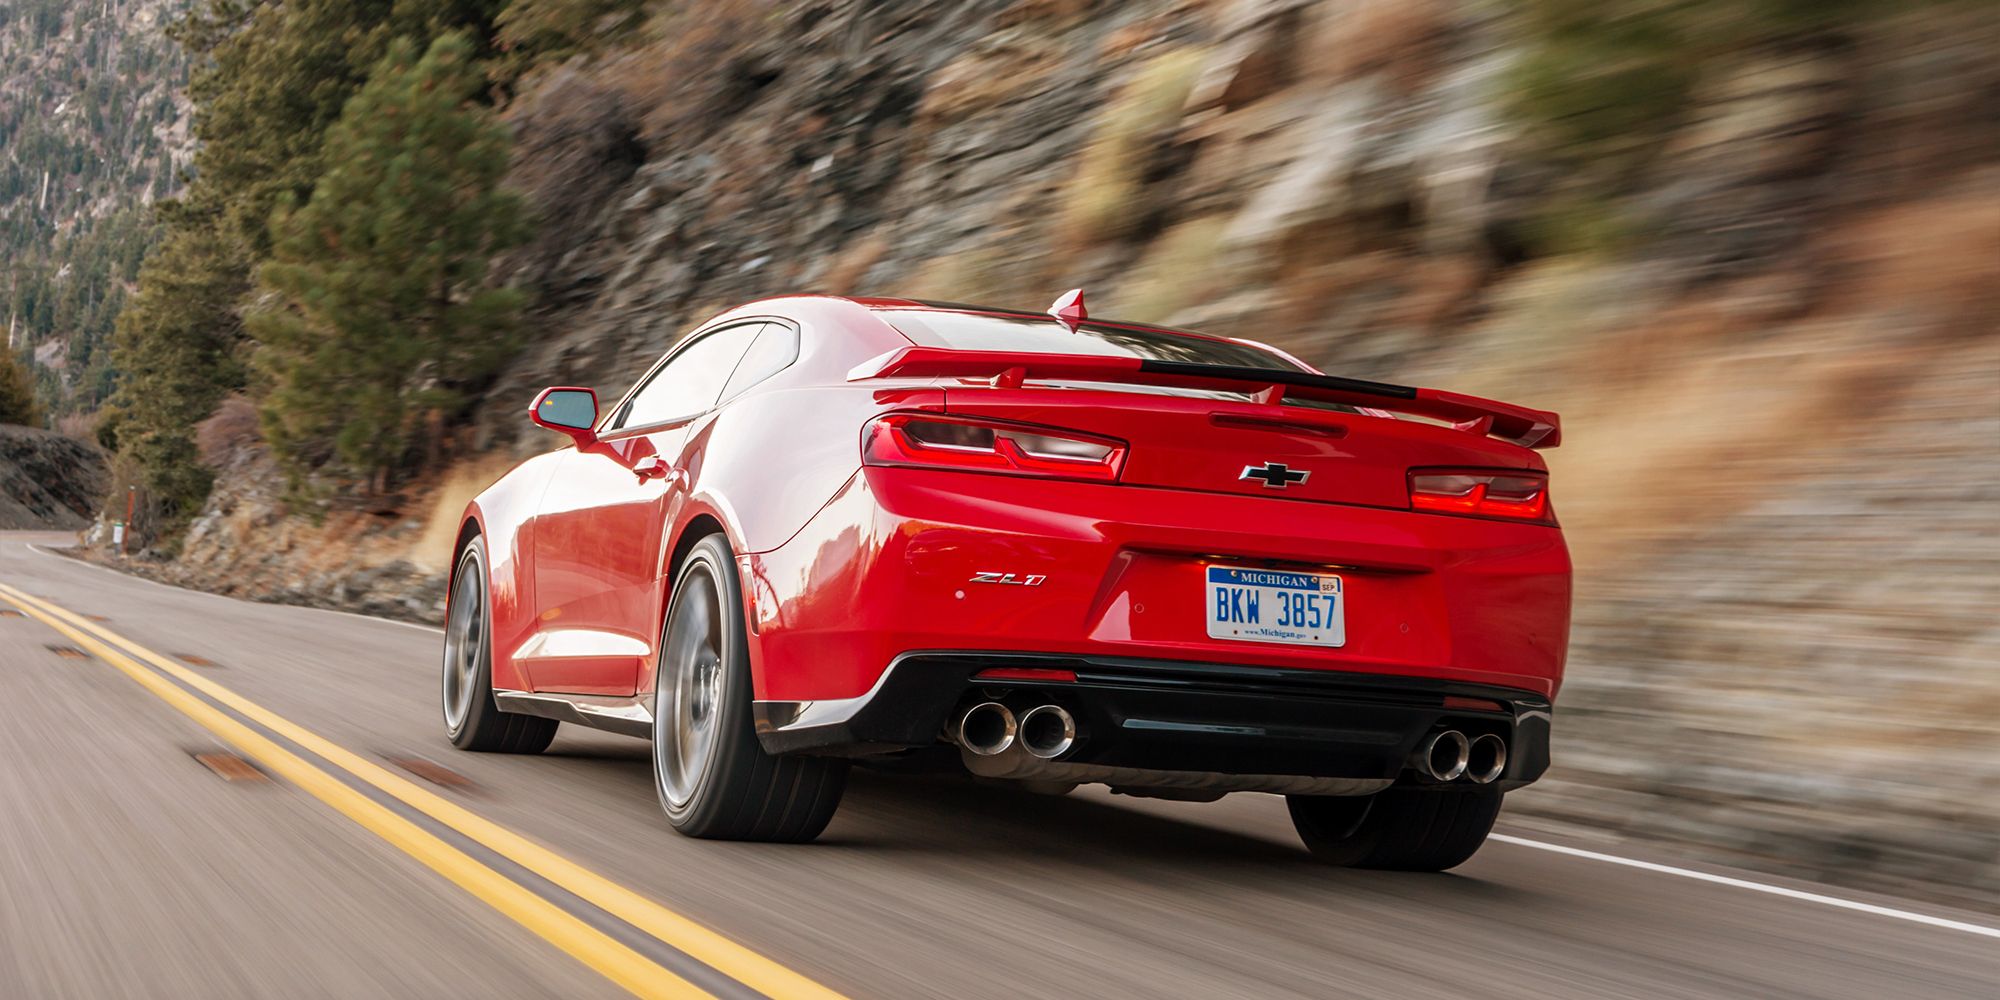 The rear of the Camaro ZL1